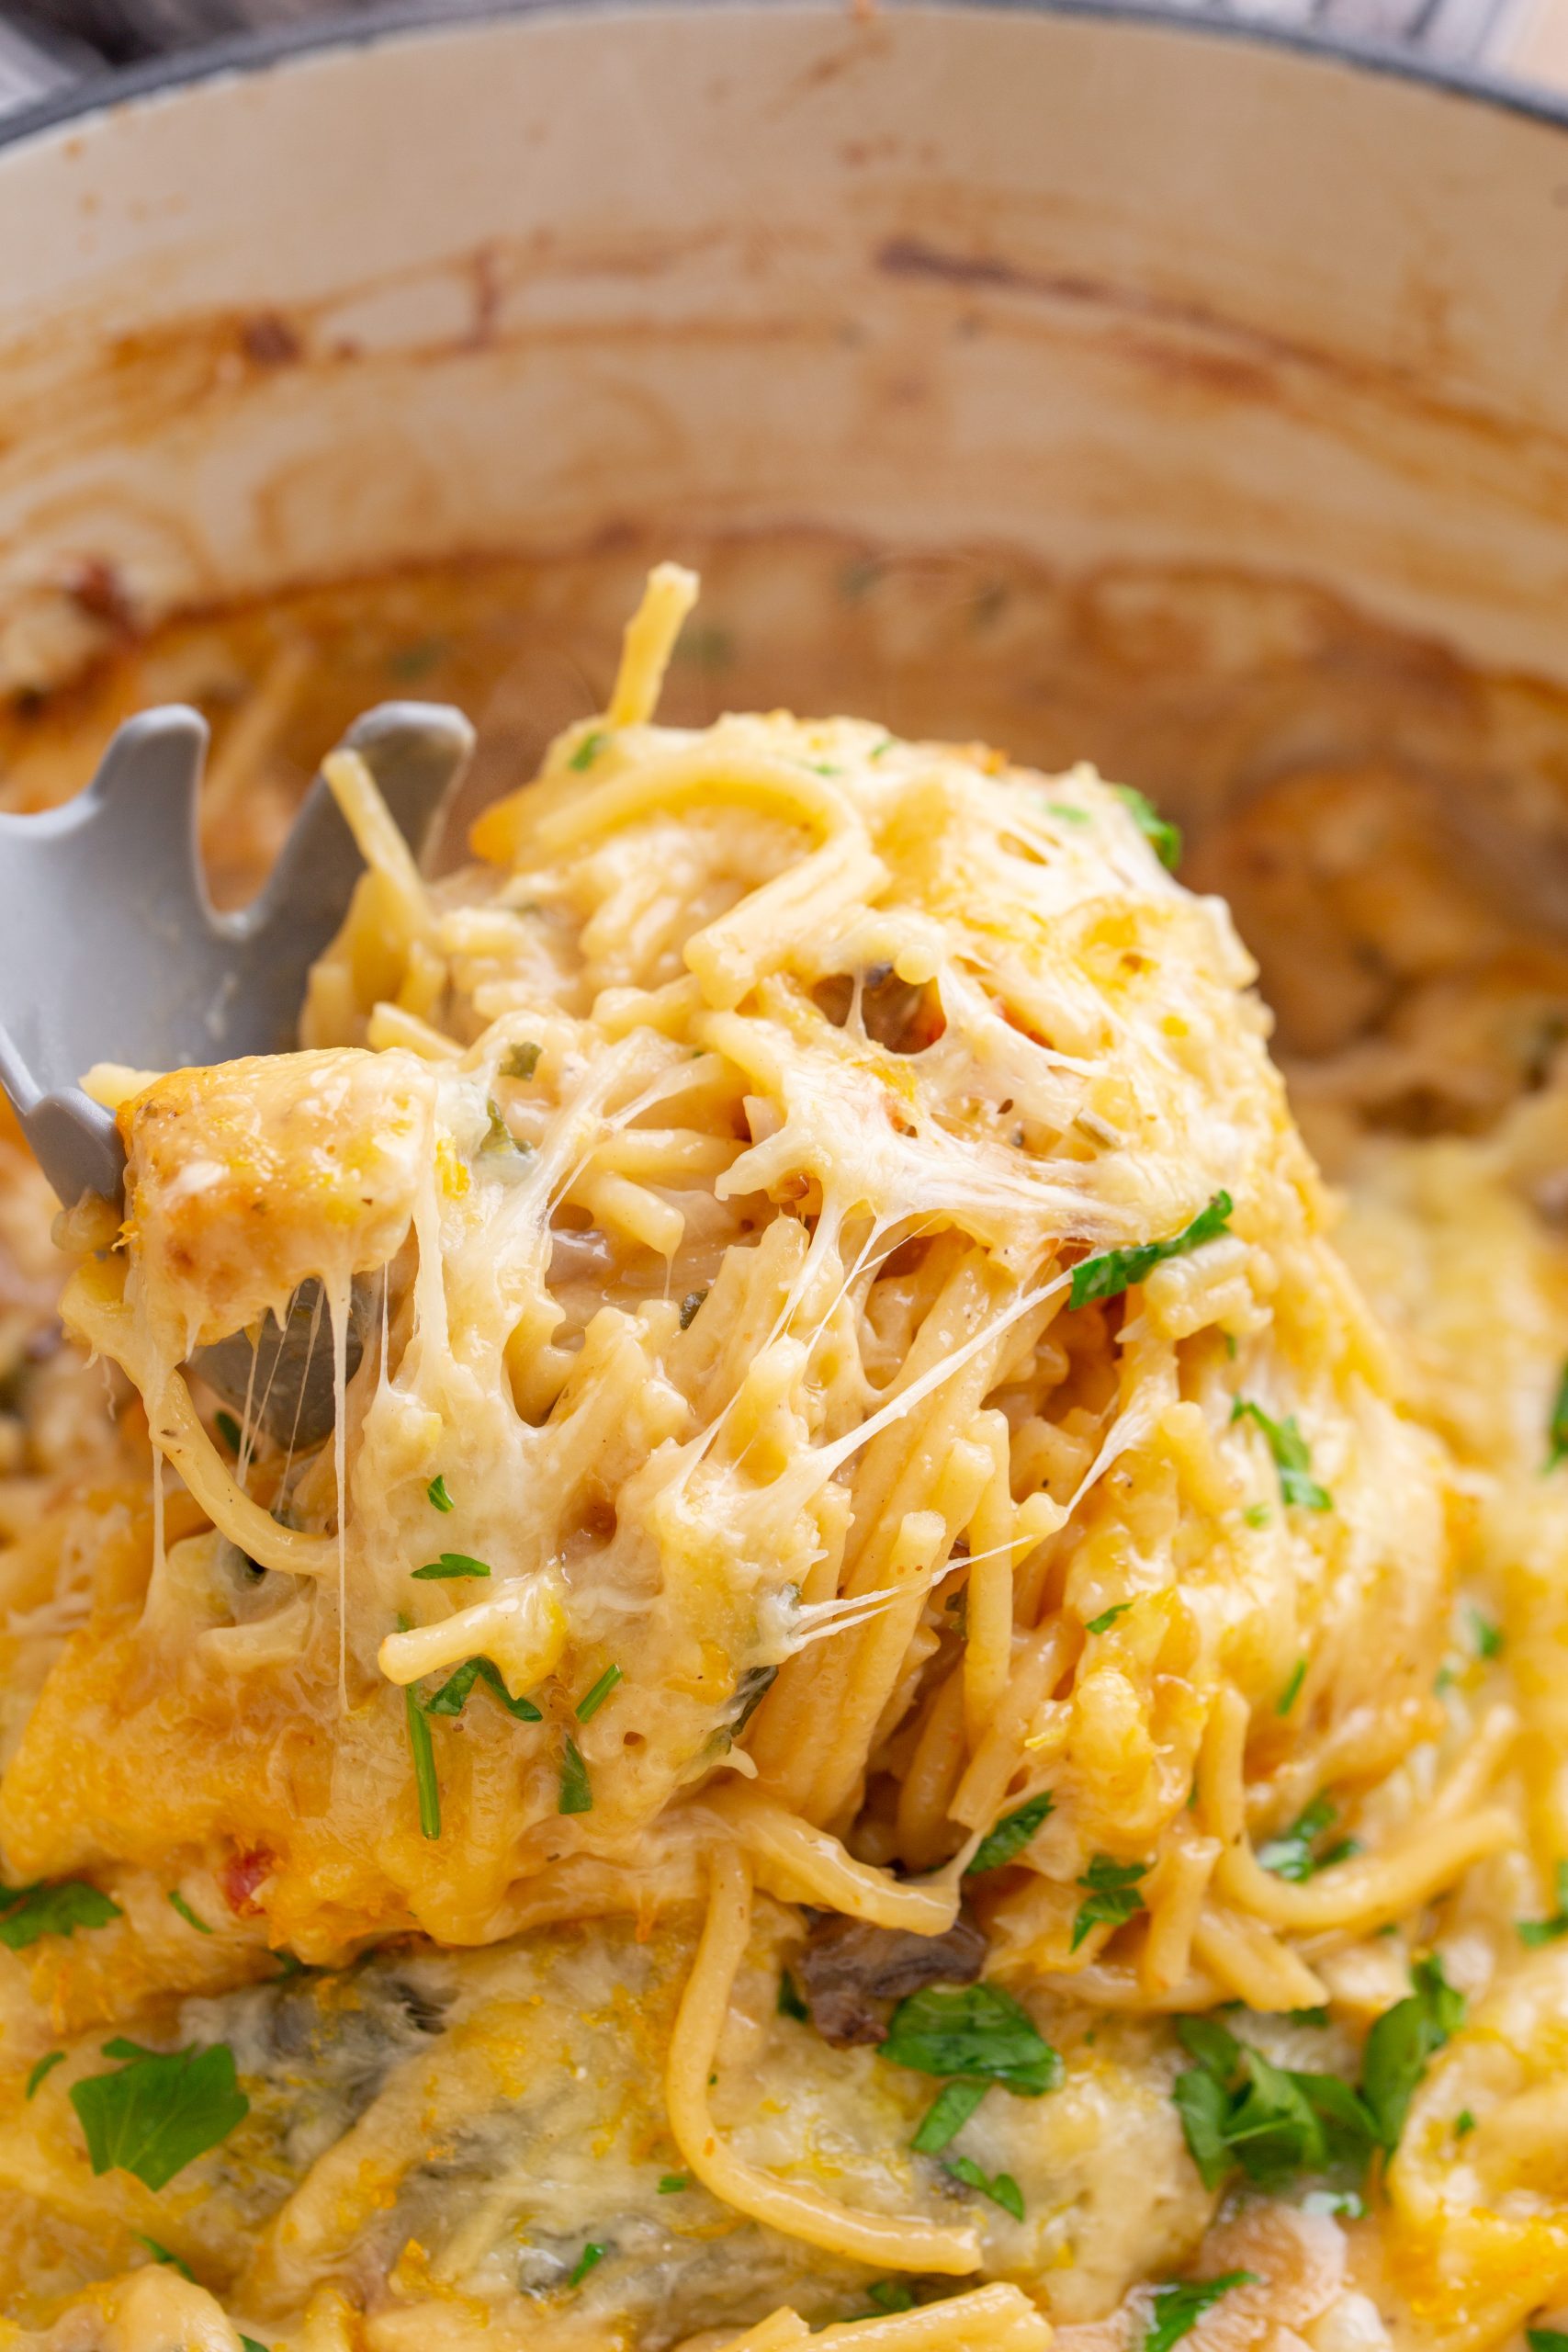 Close-up of a serving of baked cheesy pasta being lifted from a pot with a pasta fork, showing melted cheese and a garnish of fresh herbs.